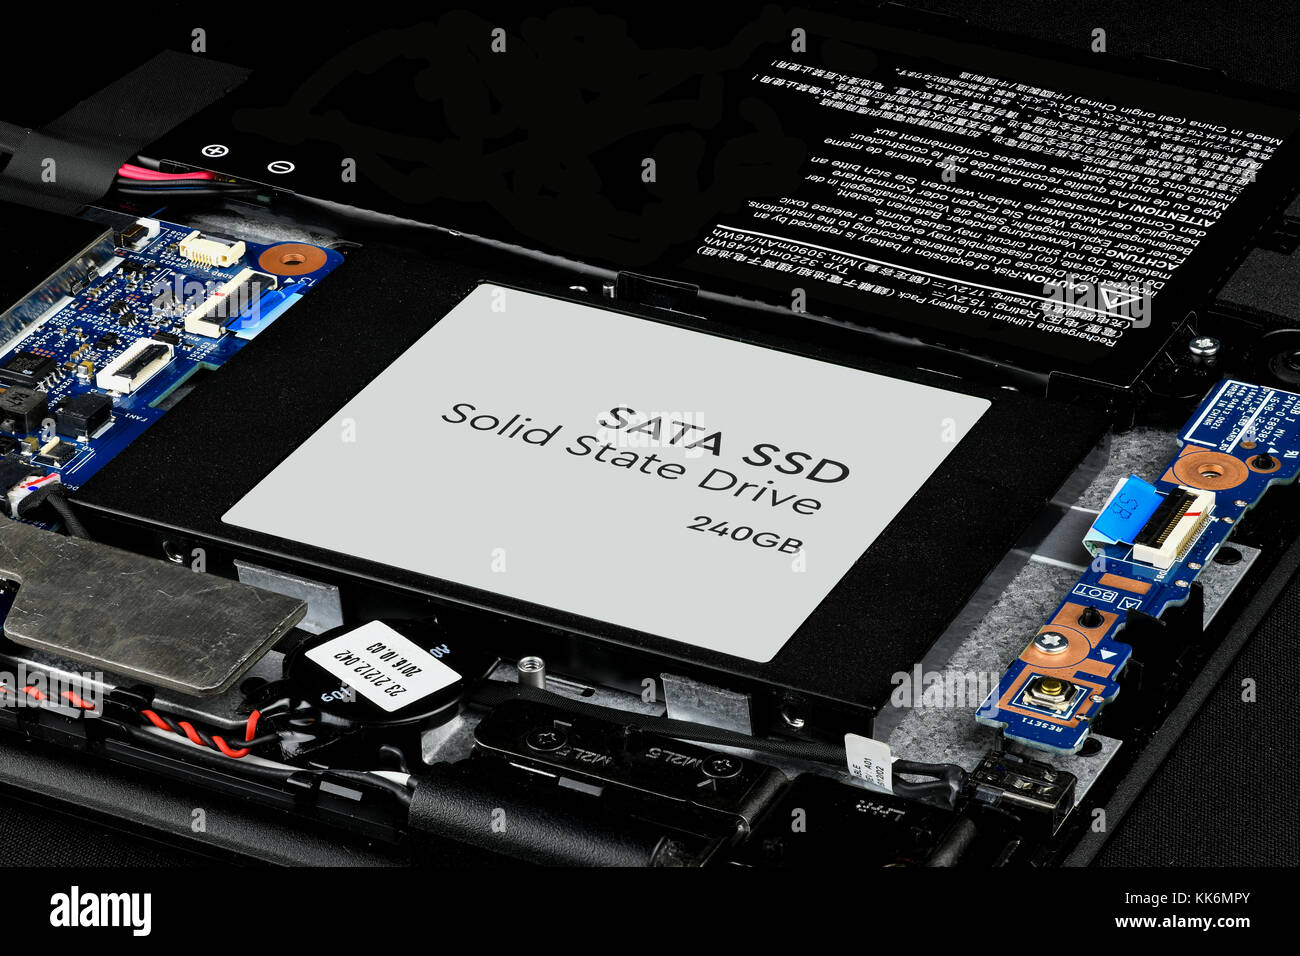 SATA SSD hard drive of a laptop no brand, solid state drive of a laptop Stock Photo